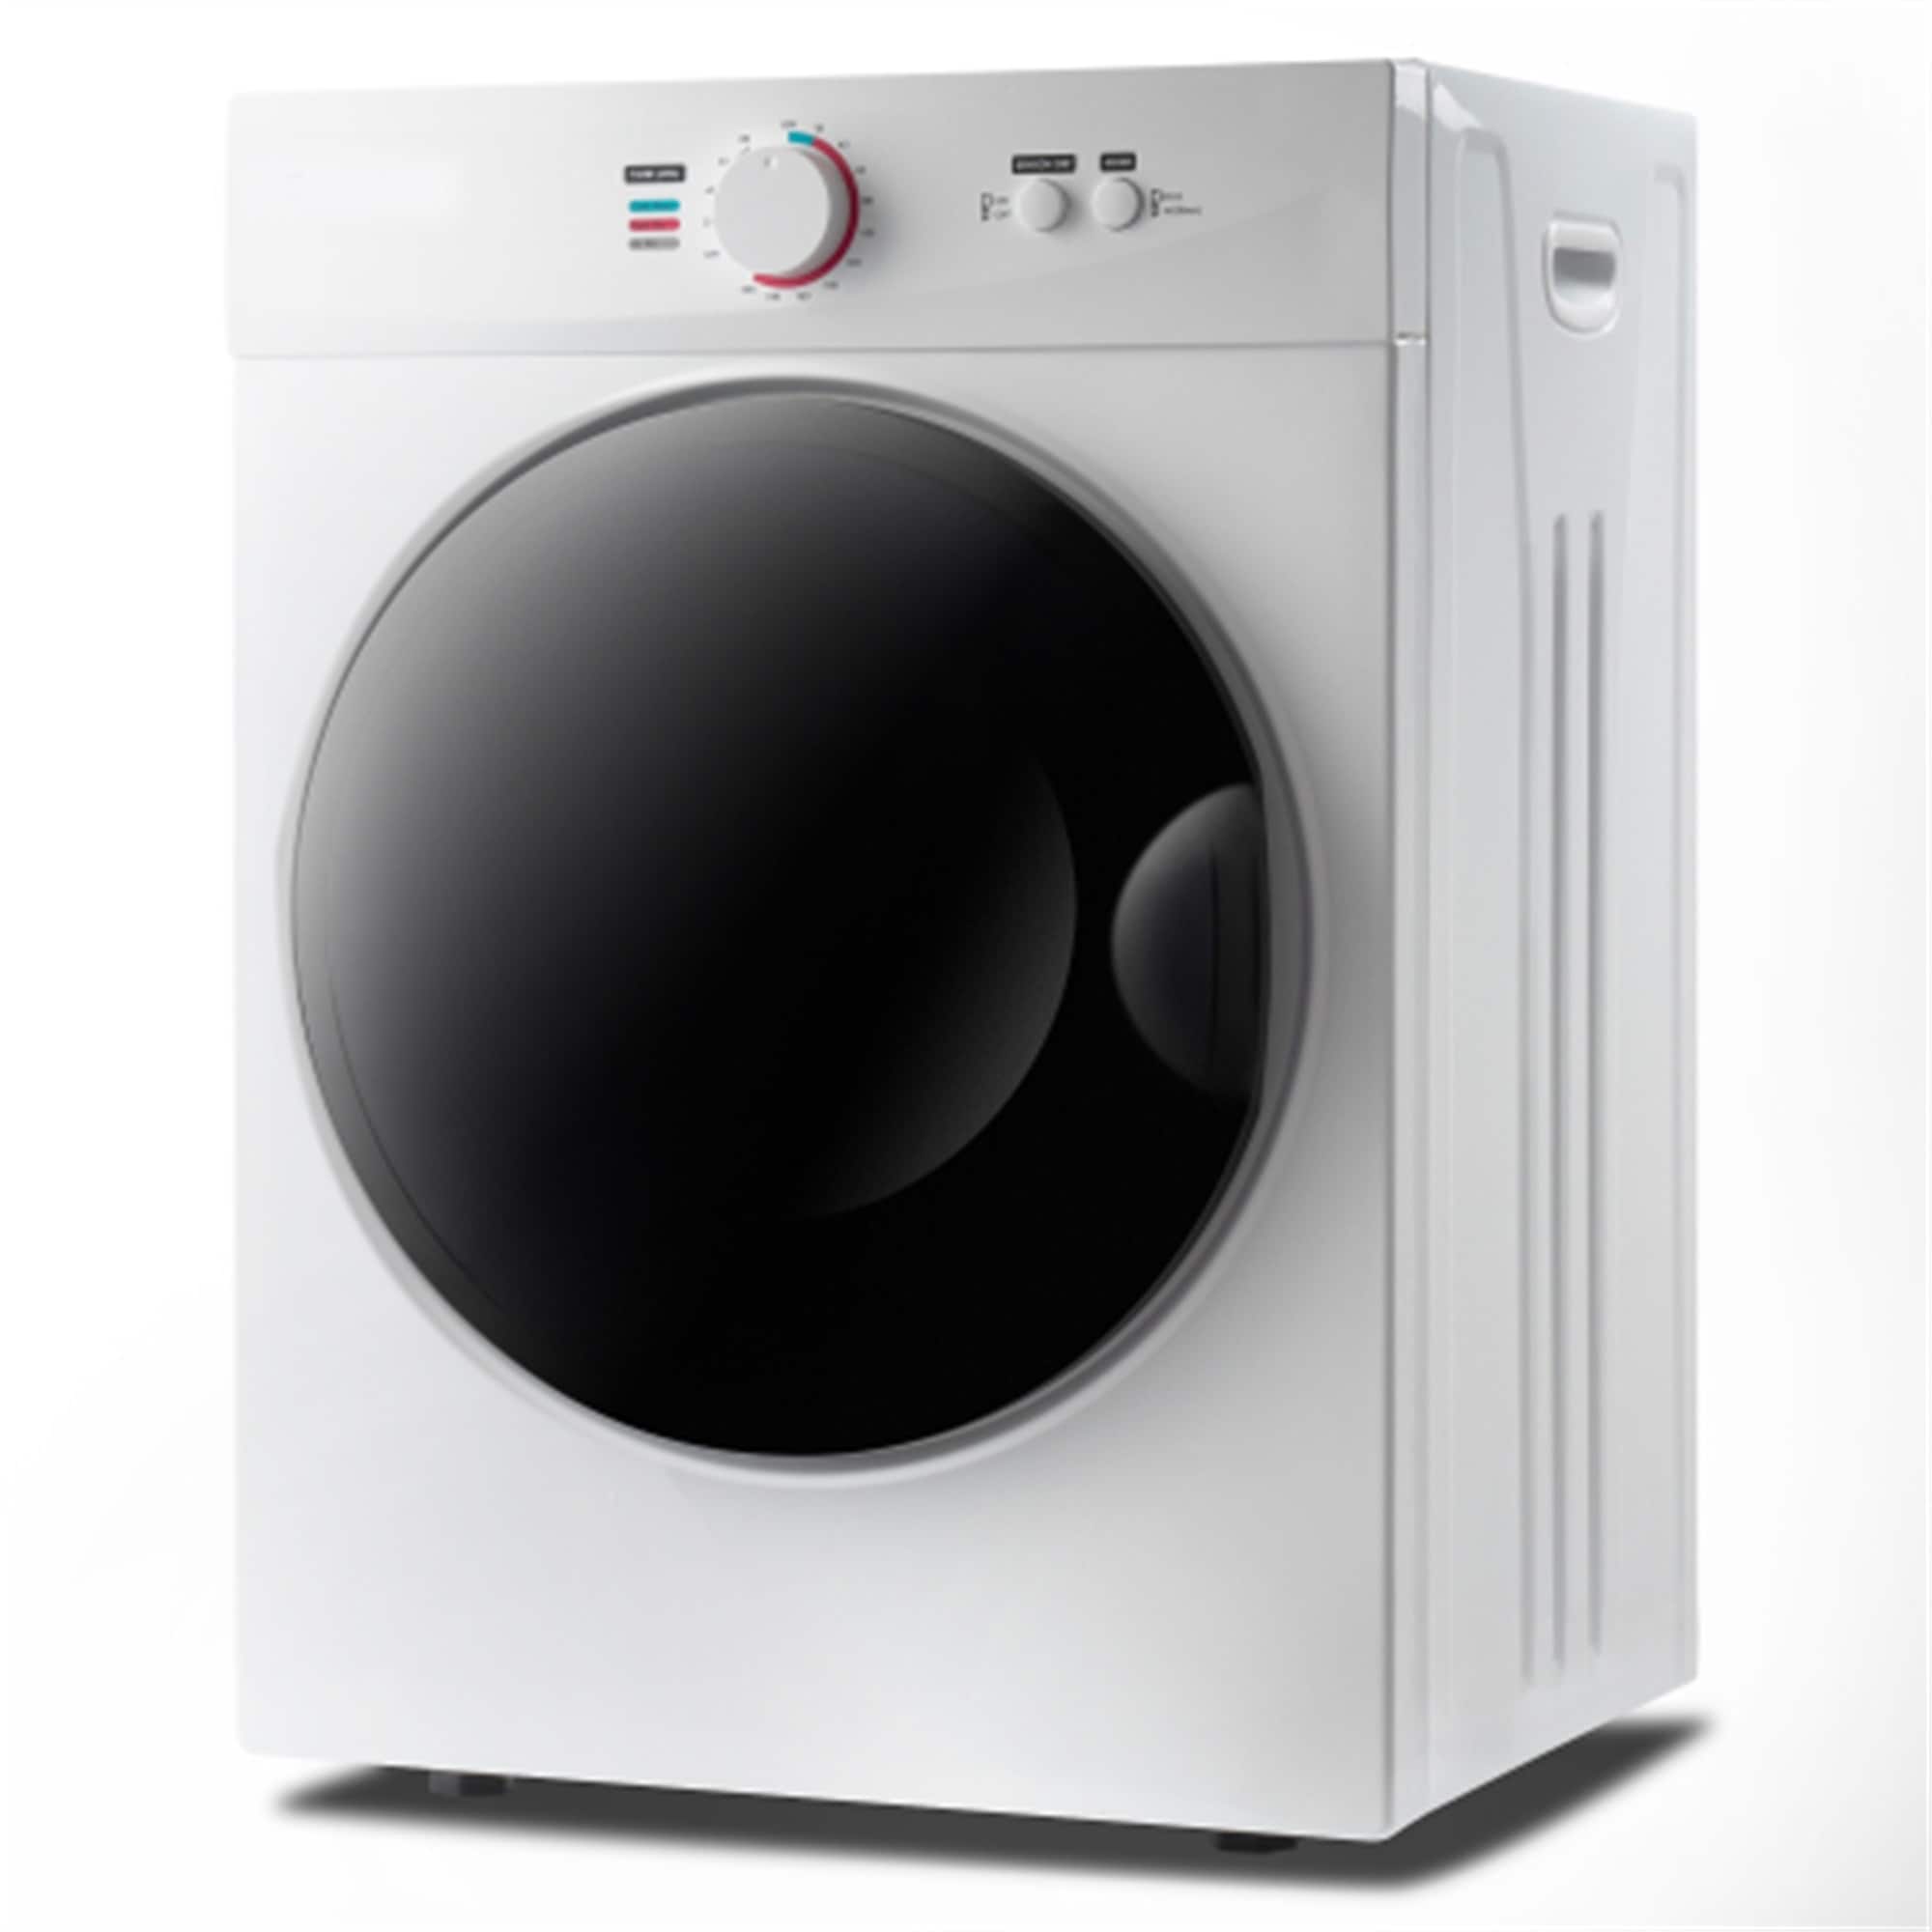 https://ak1.ostkcdn.com/images/products/is/images/direct/f7a38e3c348b25512732a85e9509d4e977e0767d/AOOLIVE-Portable-Laundry-Dryer-with-Easy-Knob-Control-for-5-Modes.jpg